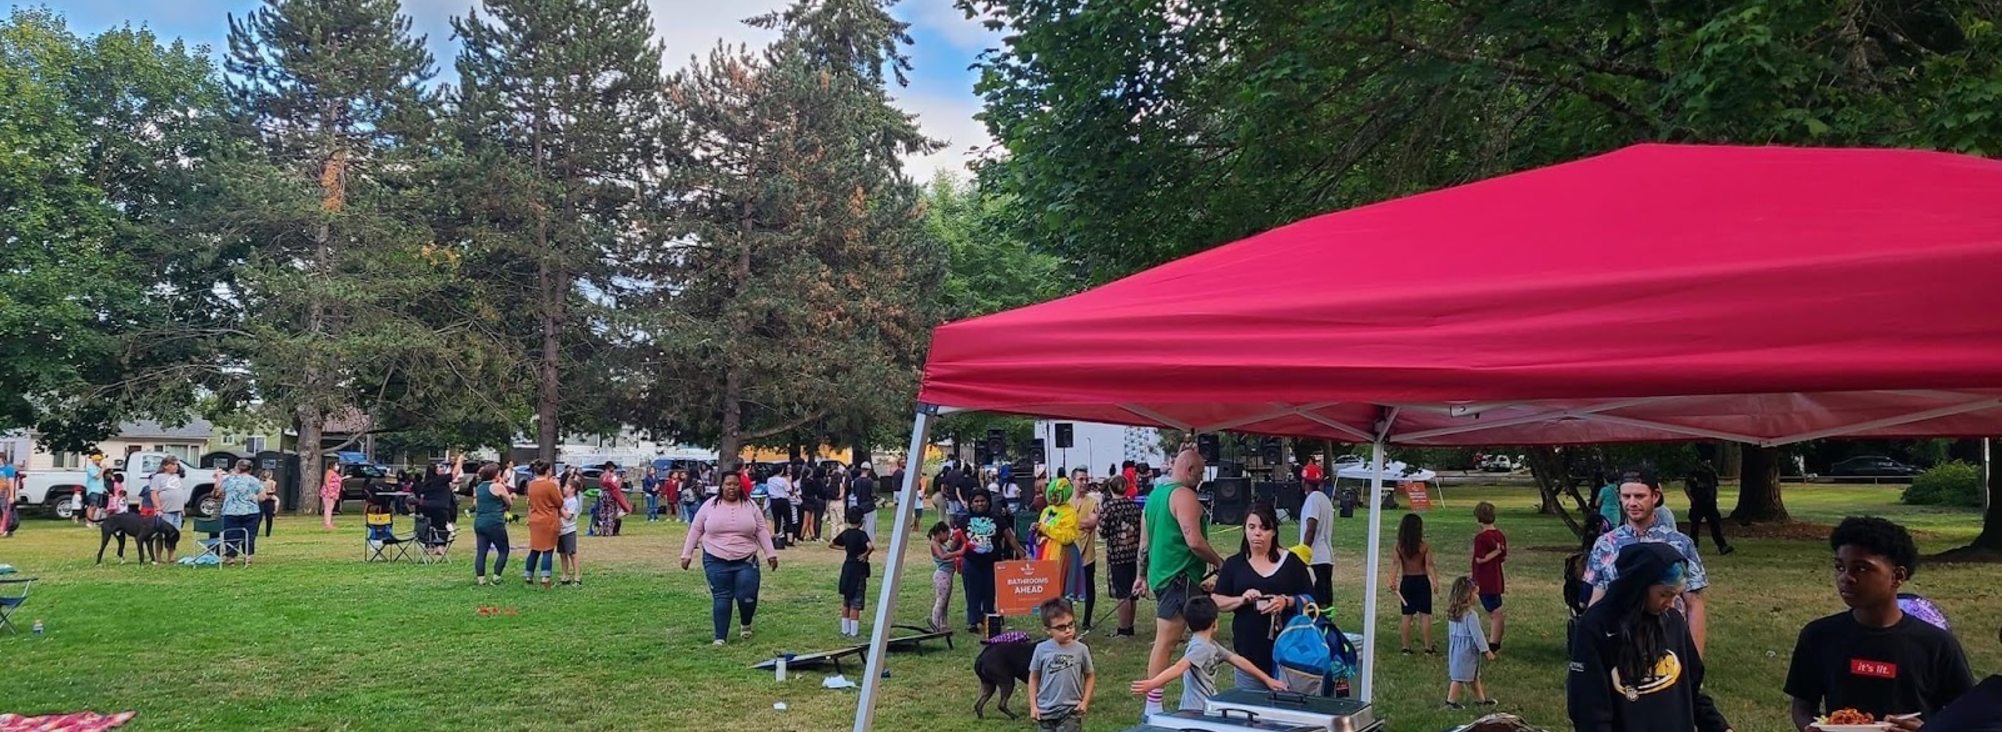 A wide view of the Kidz Outside Festival at George Park. In the foreground, people serve themselves food underneath a red tent. Trees and people line the background.